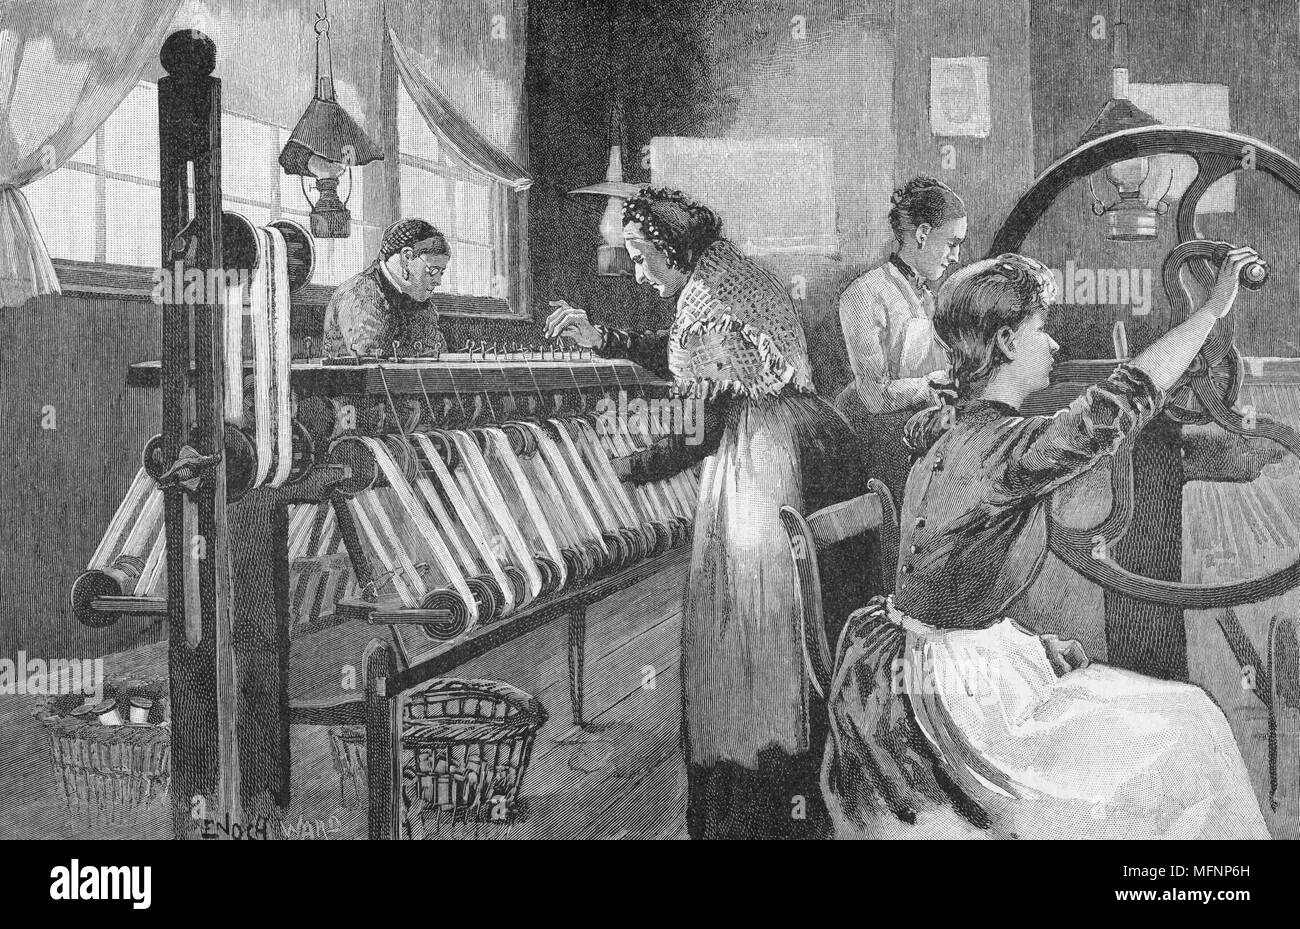 Spitalfields silk workers winding and reeling silk , London, England, late 19th century. This enclave of the silk industry was founded by Huguenot refugees from France after Louis XIV's Revocation of the Edict of Nantes (1685). Engraving, 1893. Stock Photo